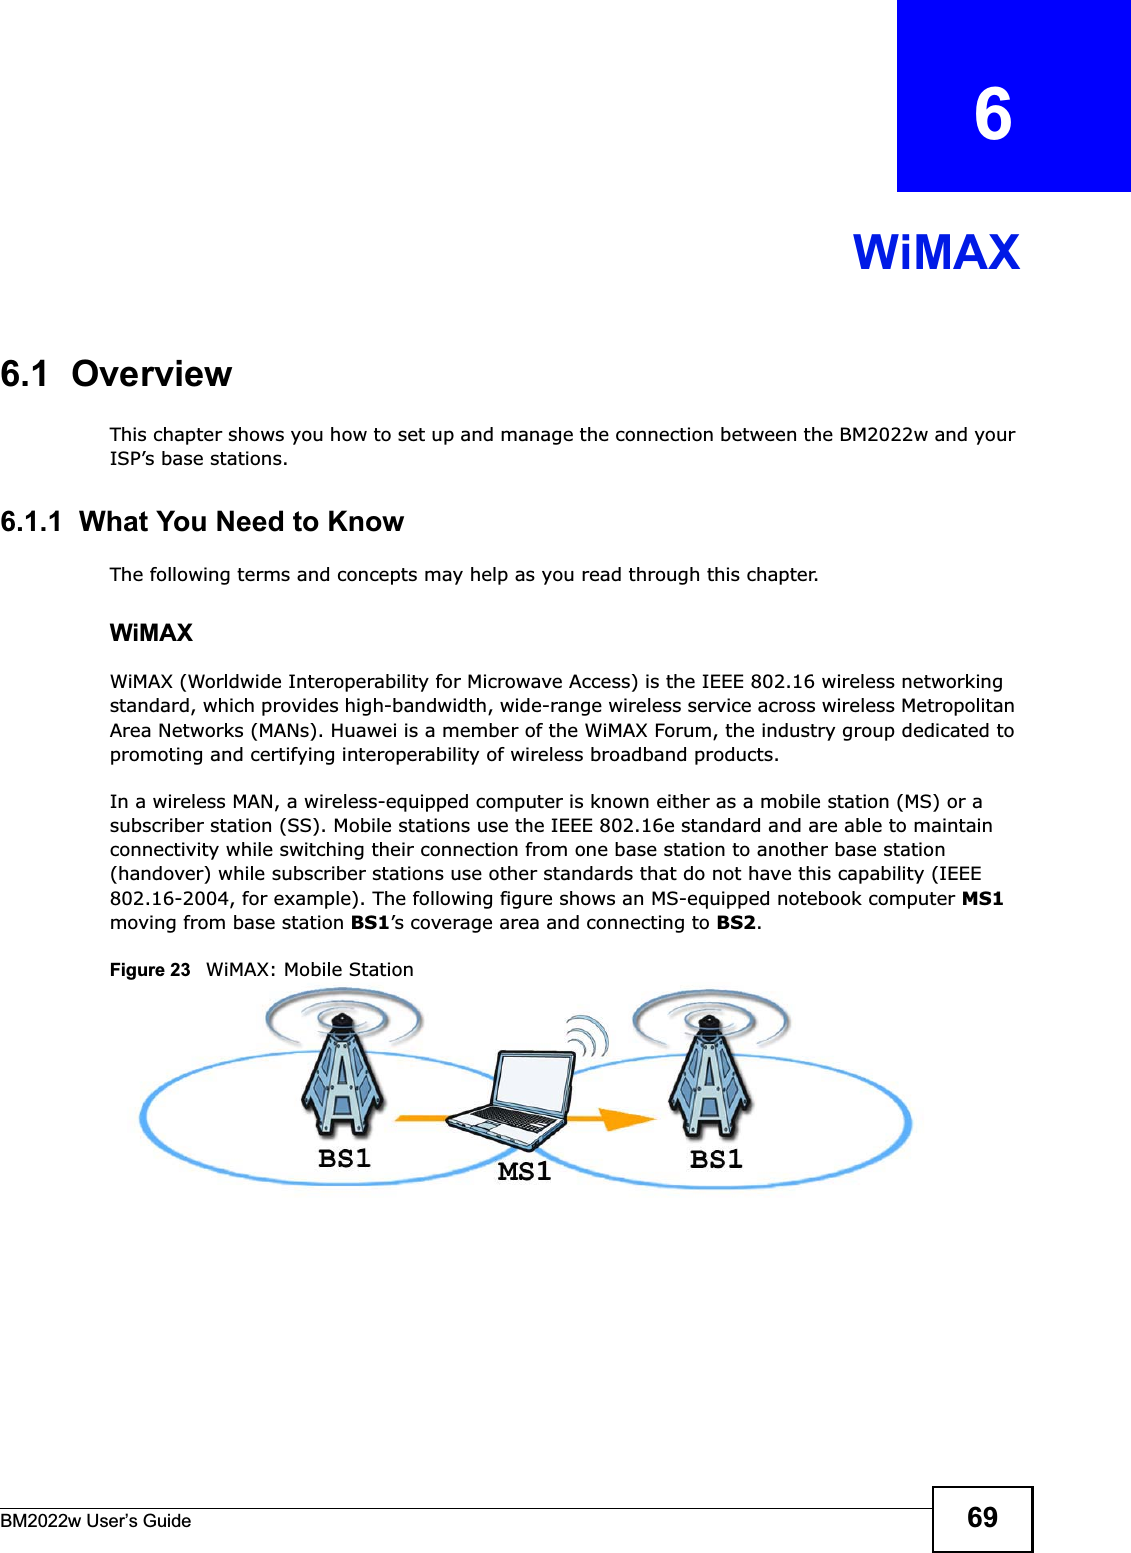 BM2022w User’s Guide 69CHAPTER   6WiMAX6.1  OverviewThis chapter shows you how to set up and manage the connection between the BM2022w and your ISP’s base stations.6.1.1  What You Need to KnowThe following terms and concepts may help as you read through this chapter.WiMAX WiMAX (Worldwide Interoperability for Microwave Access) is the IEEE 802.16 wireless networking standard, which provides high-bandwidth, wide-range wireless service across wireless Metropolitan Area Networks (MANs). Huawei is a member of the WiMAX Forum, the industry group dedicated to promoting and certifying interoperability of wireless broadband products.In a wireless MAN, a wireless-equipped computer is known either as a mobile station (MS) or a subscriber station (SS). Mobile stations use the IEEE 802.16e standard and are able to maintain connectivity while switching their connection from one base station to another base station (handover) while subscriber stations use other standards that do not have this capability (IEEE 802.16-2004, for example). The following figure shows an MS-equipped notebook computer MS1moving from base station BS1’s coverage area and connecting to BS2.Figure 23   WiMAX: Mobile Station